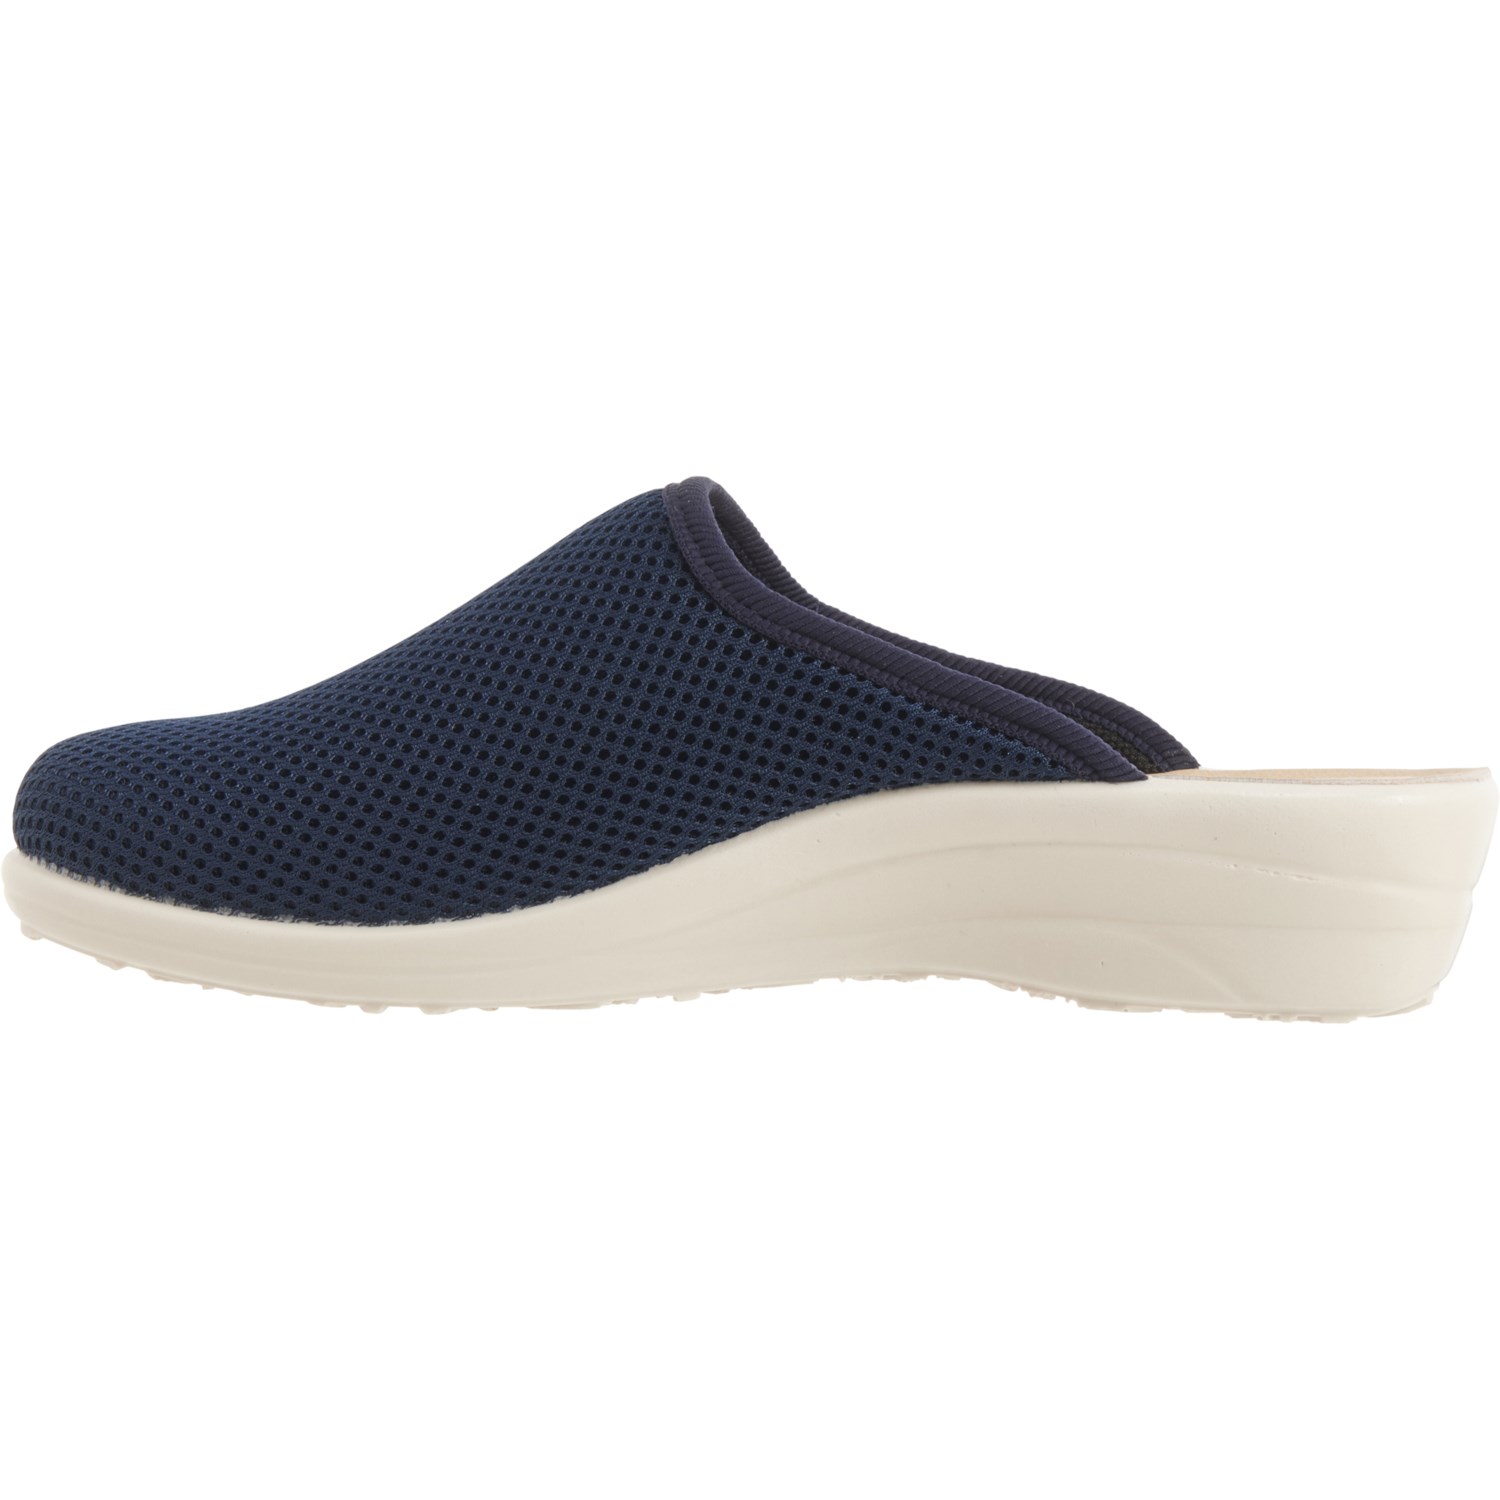 Fly Flot Made in Italy Mesh Clogs (For Women) - Save 52%